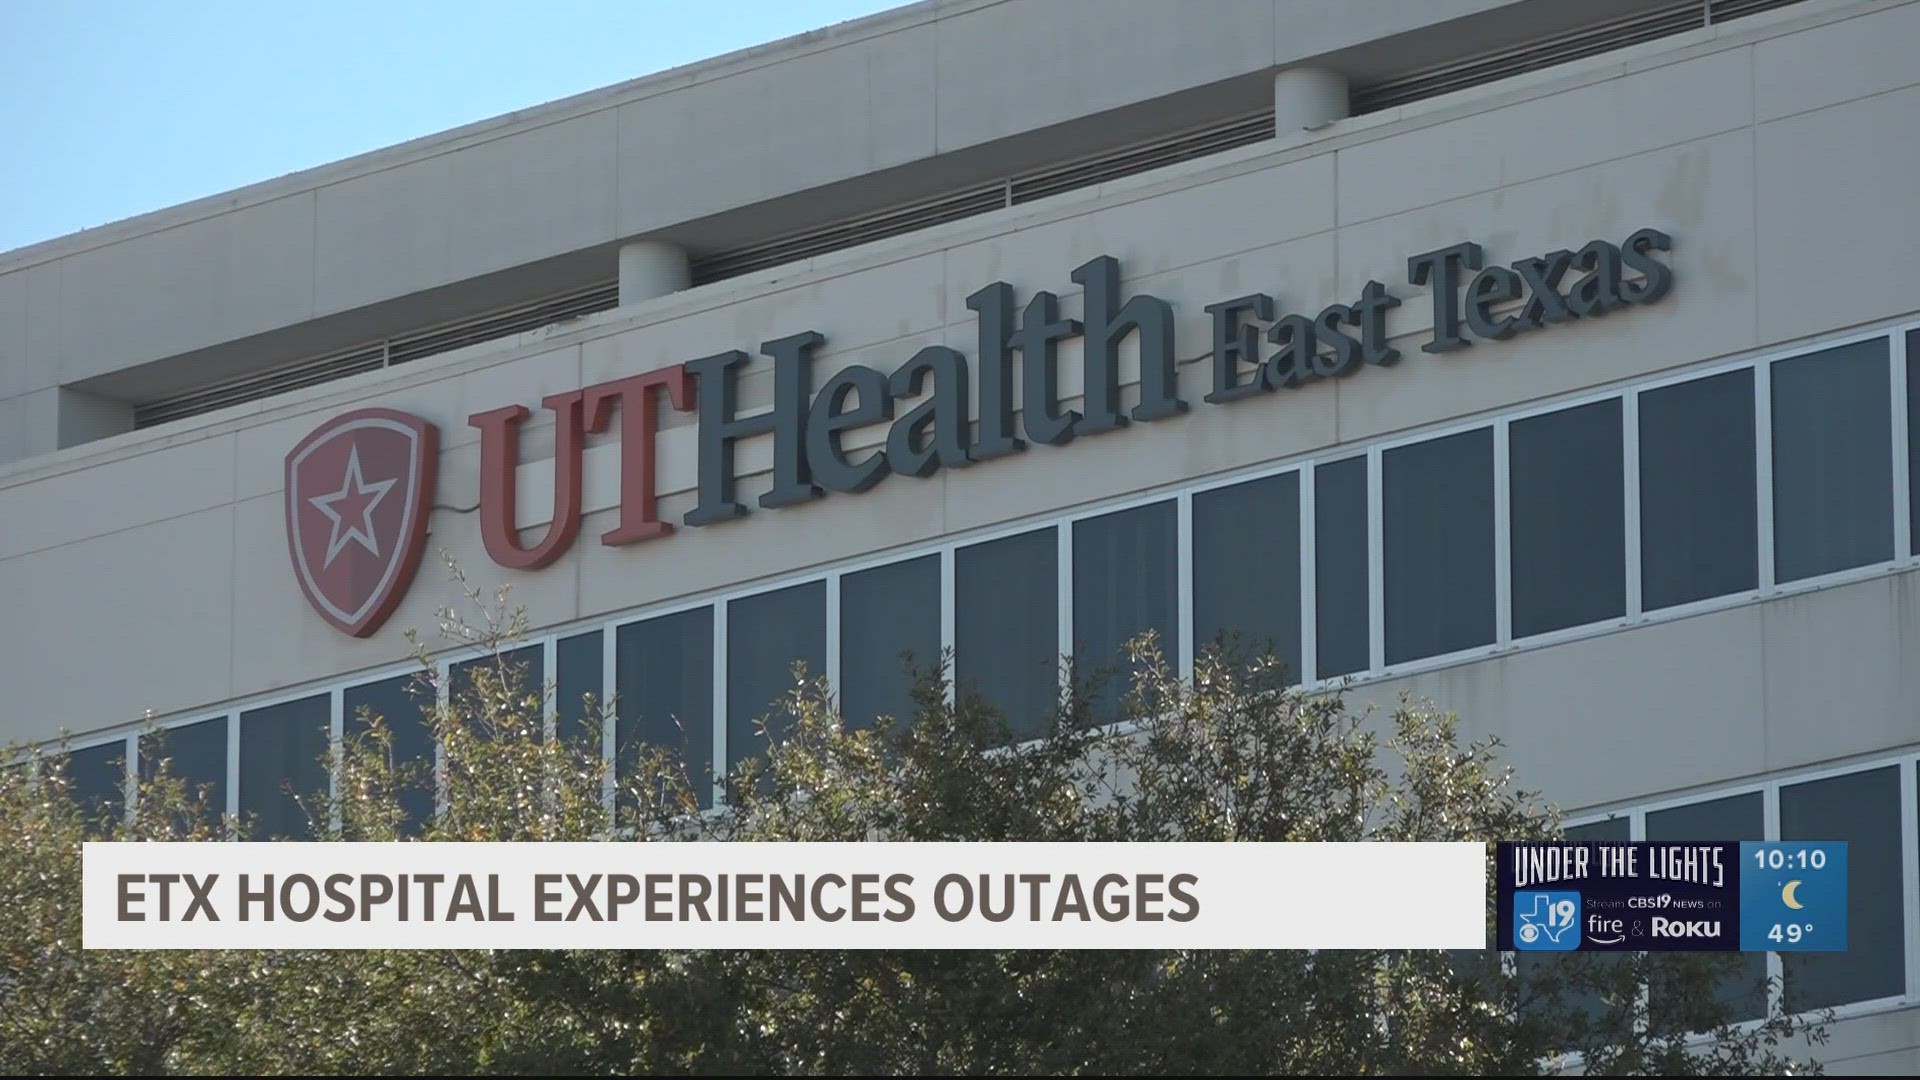 The network outage on Thursday evening placed the hospital in divert status for their emergency rooms.